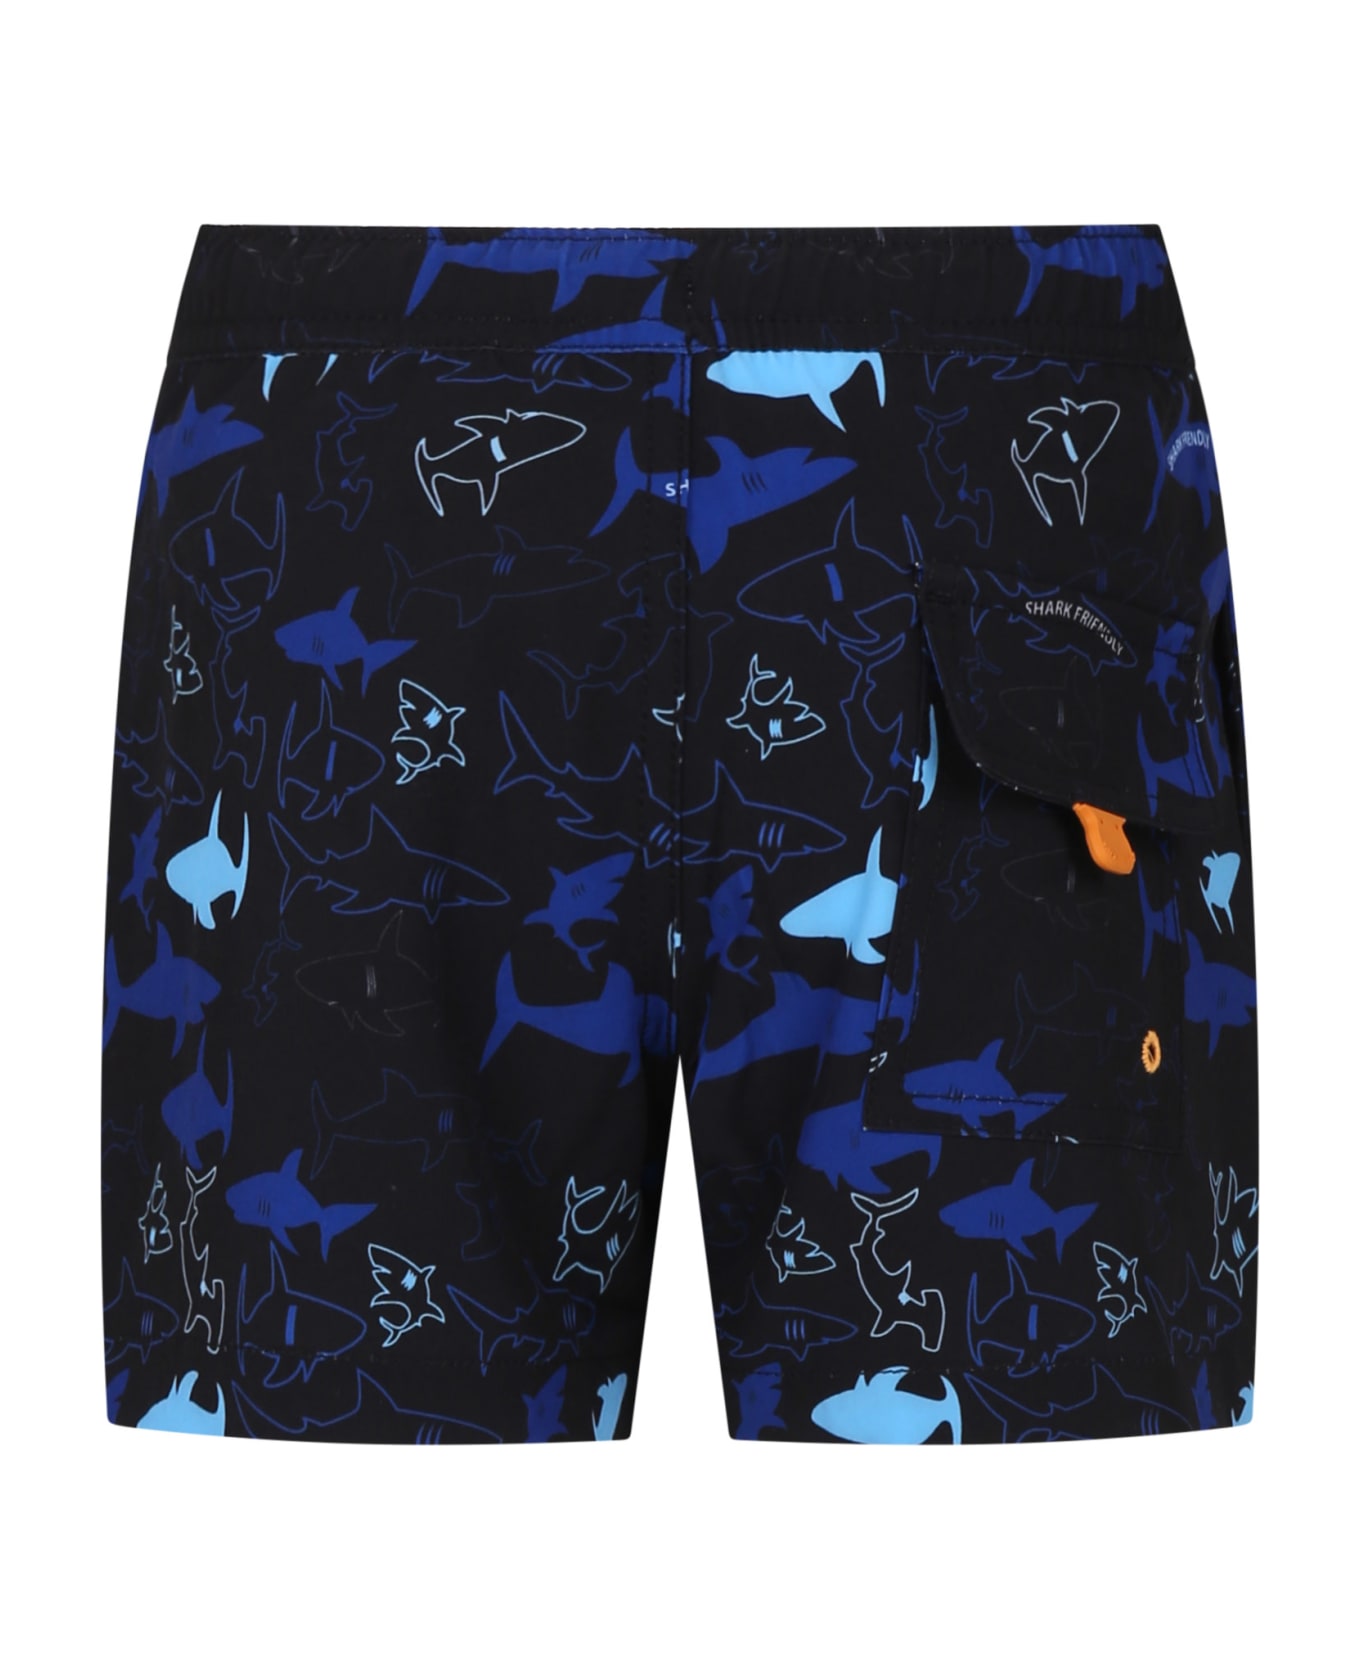 Save the Duck Black Swim Shorts For Boy With Shark Print - Black